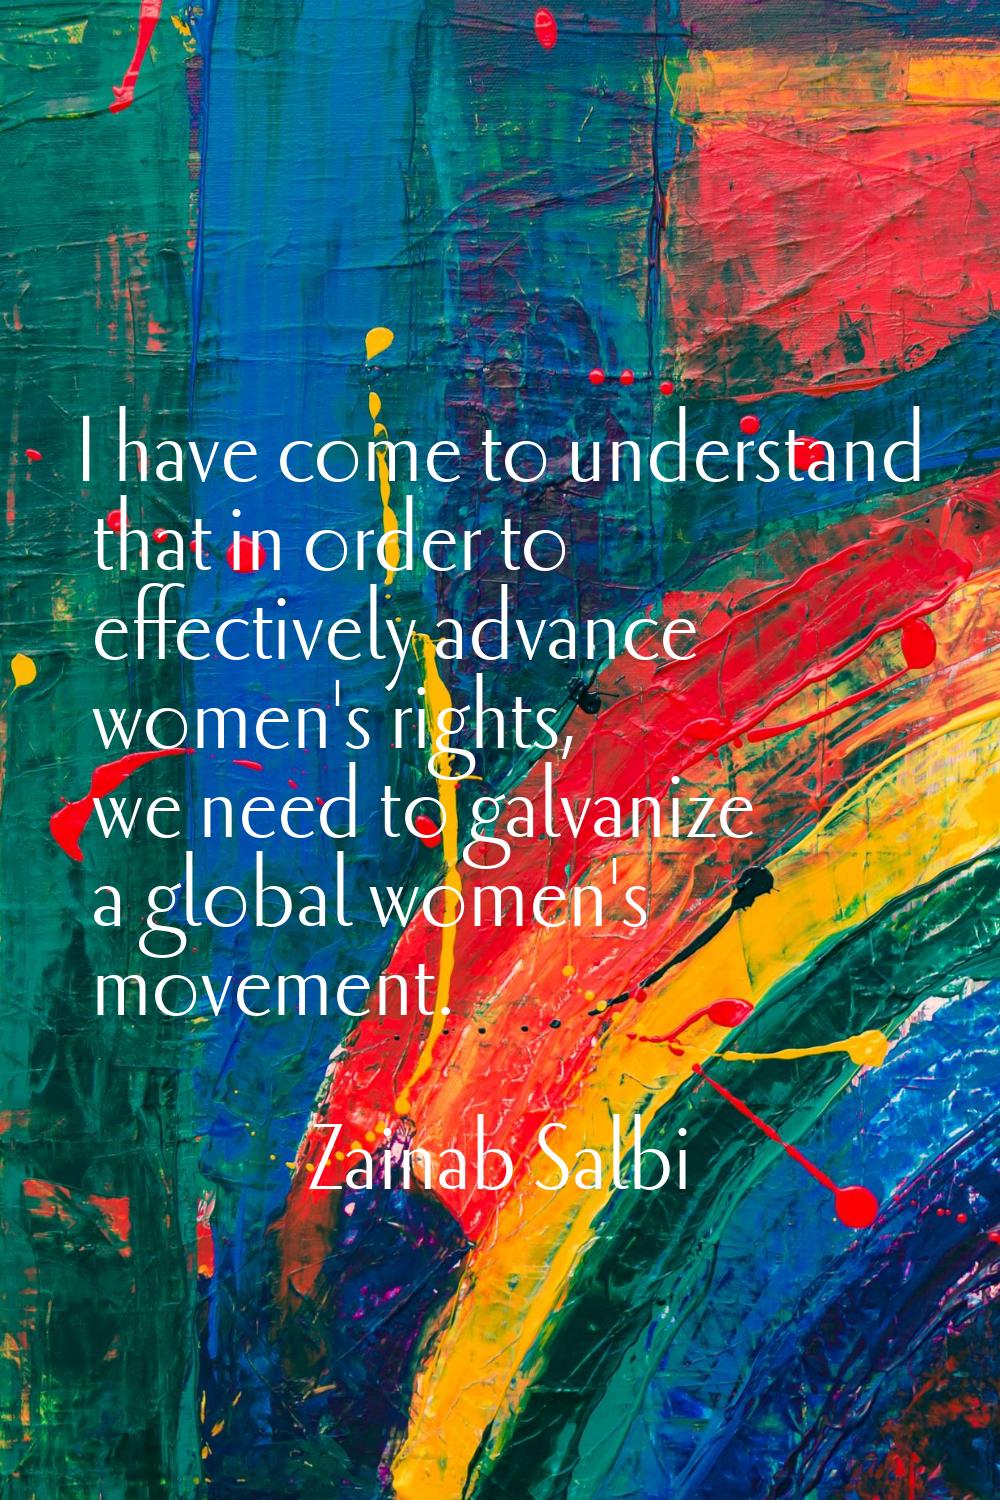 I have come to understand that in order to effectively advance women's rights, we need to galvanize